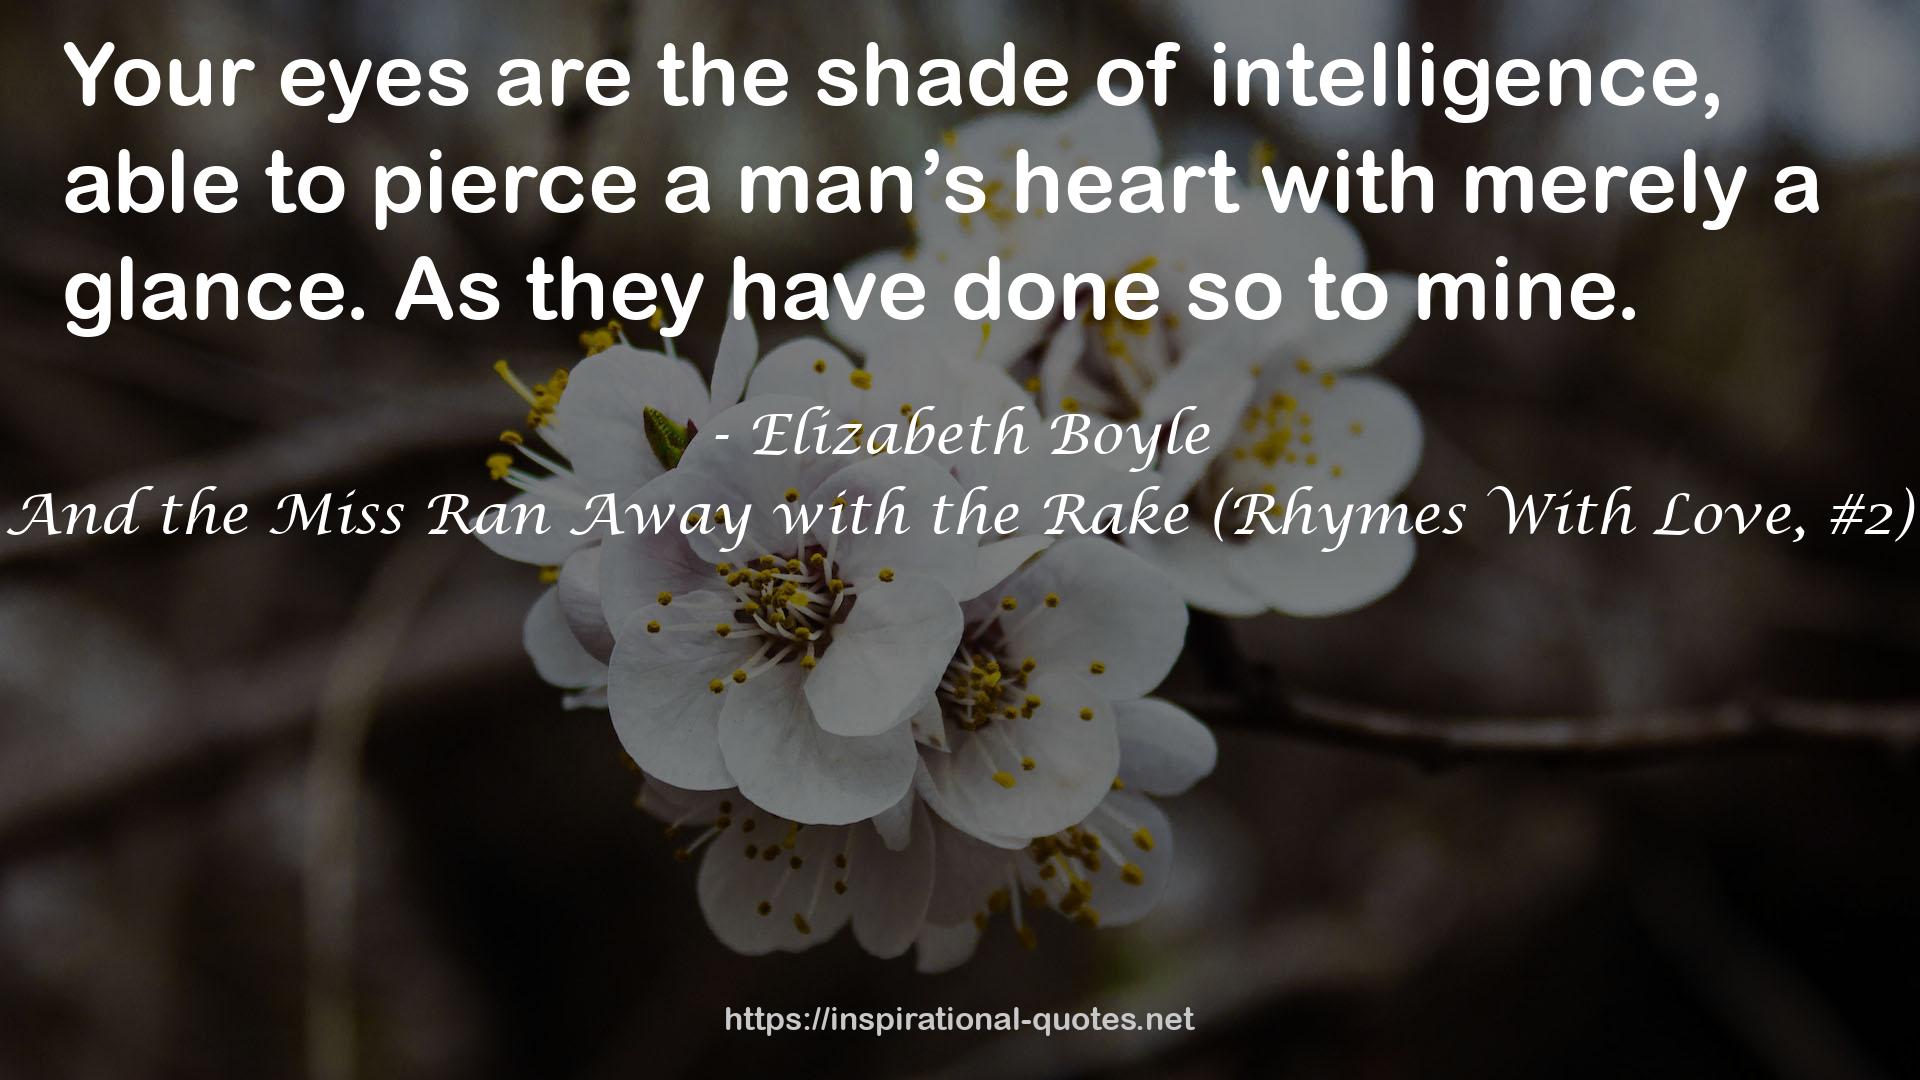 And the Miss Ran Away with the Rake (Rhymes With Love, #2) QUOTES